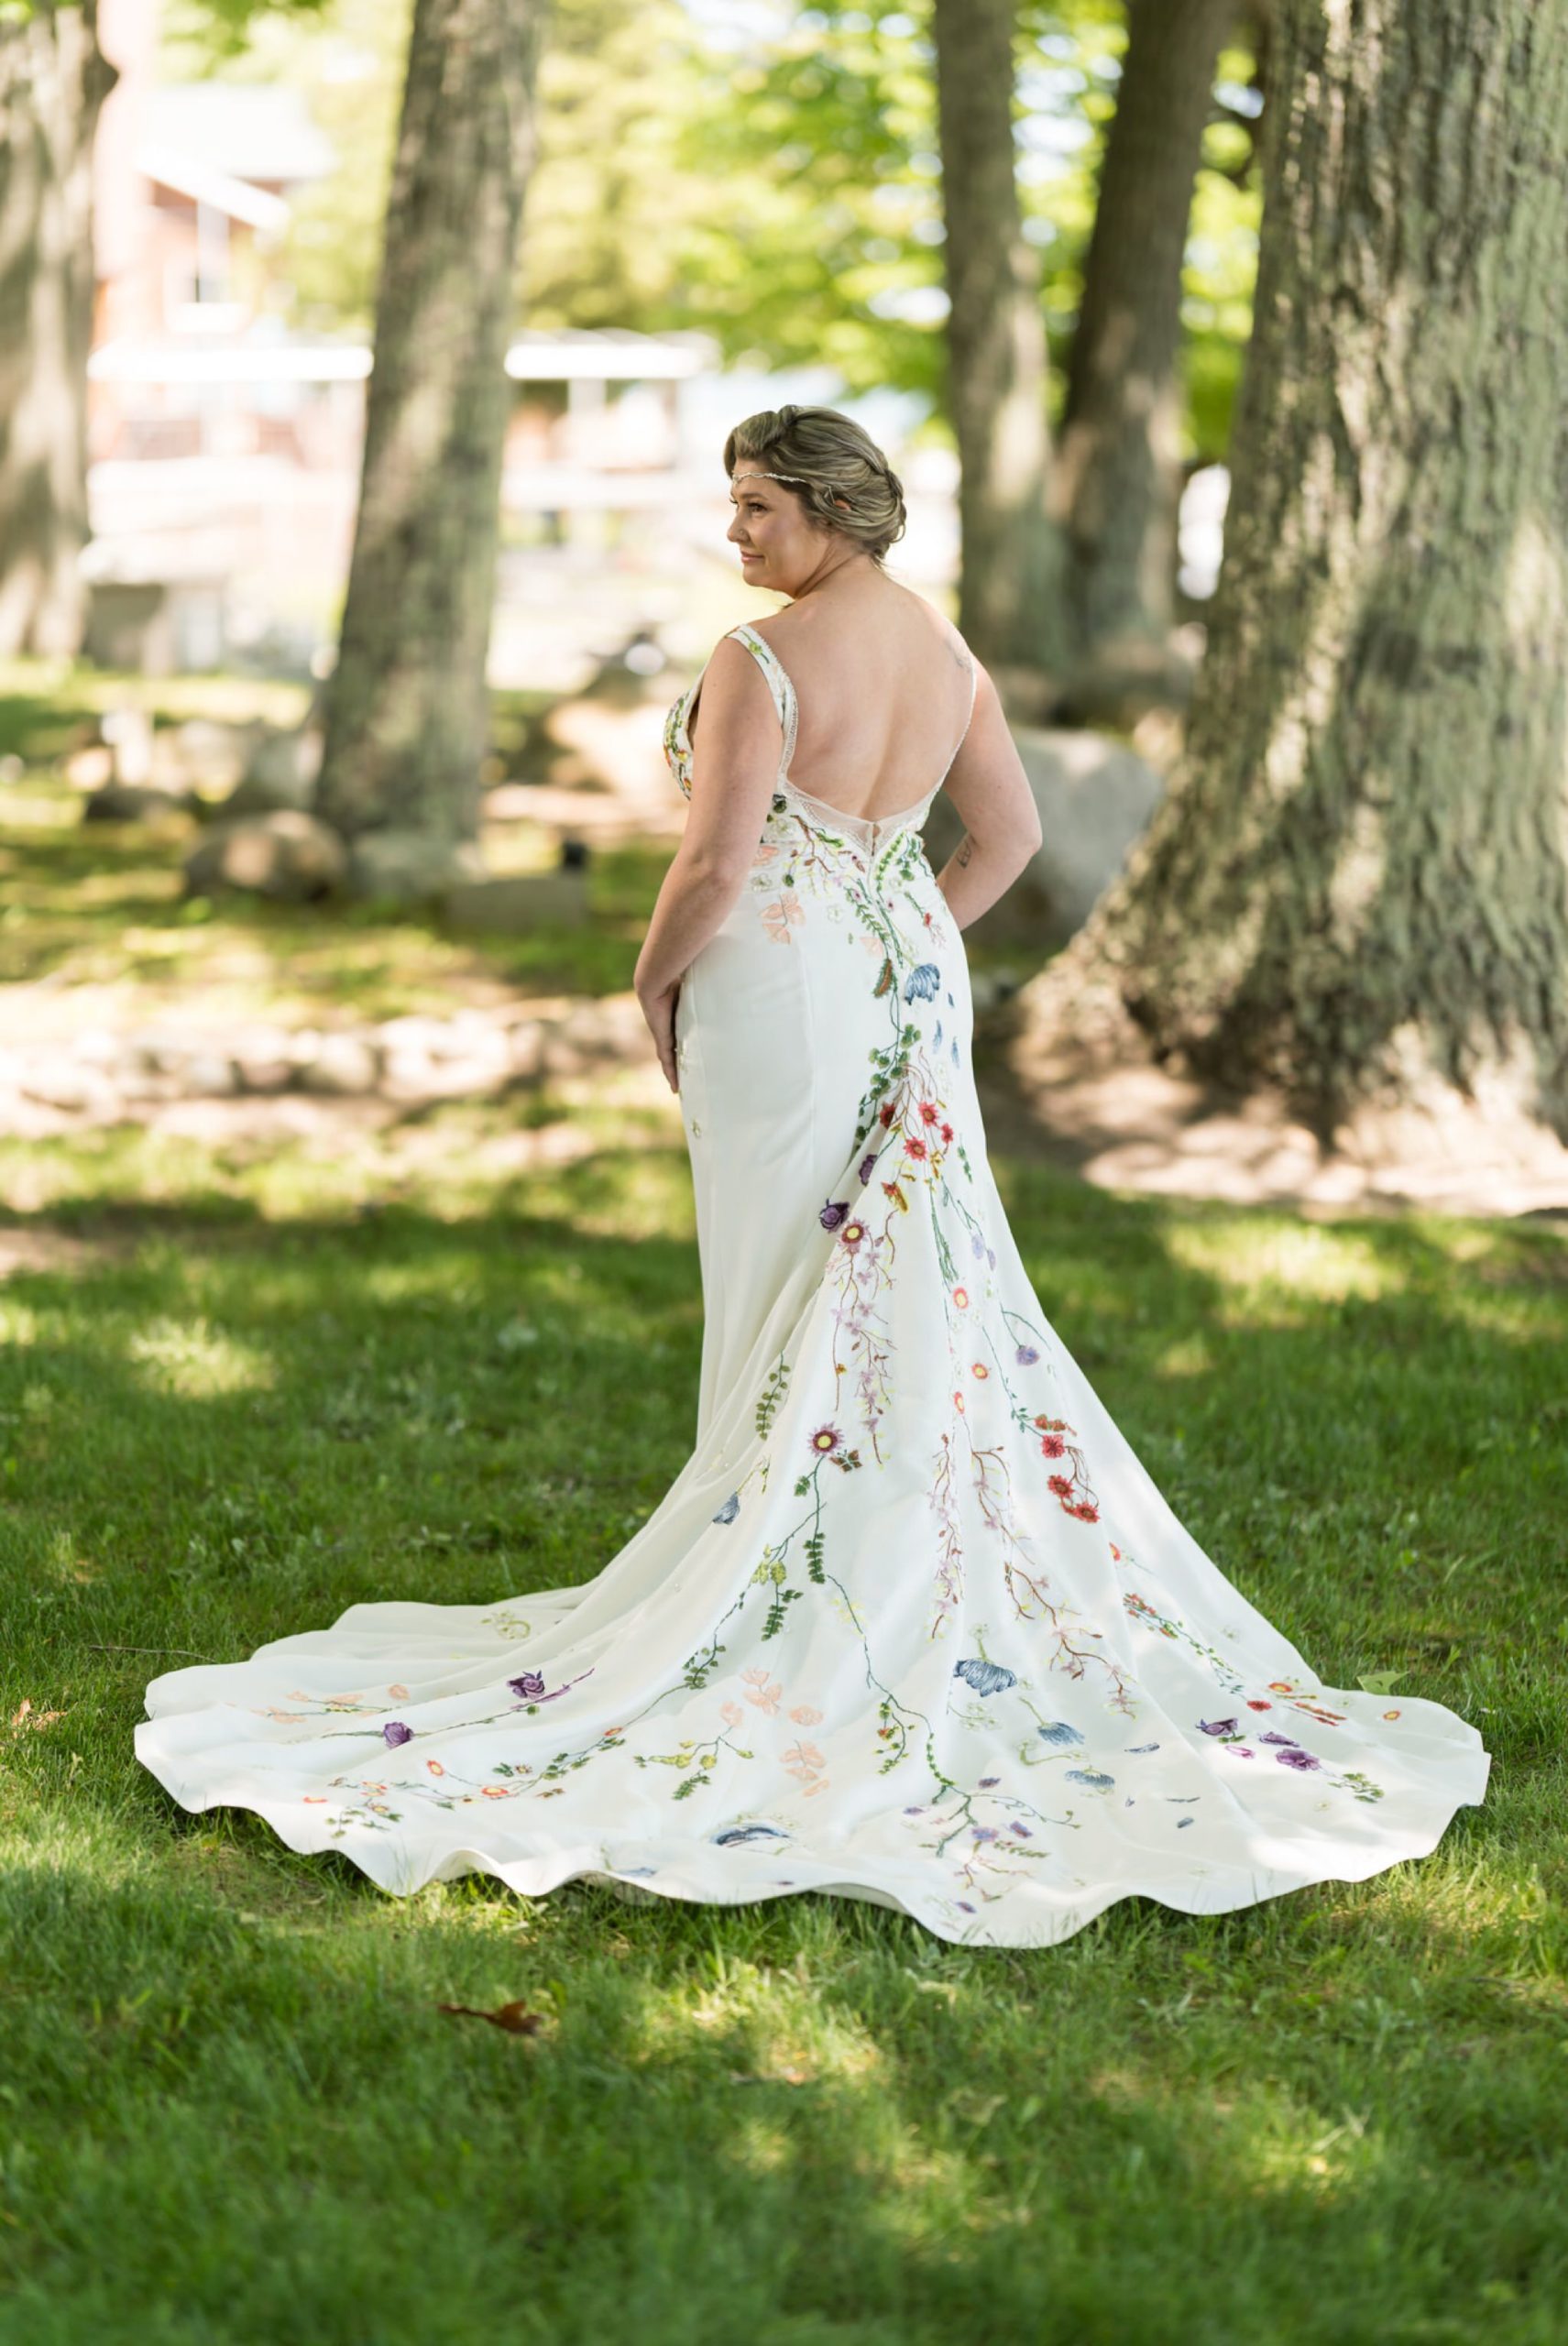 bride with floral dress poses